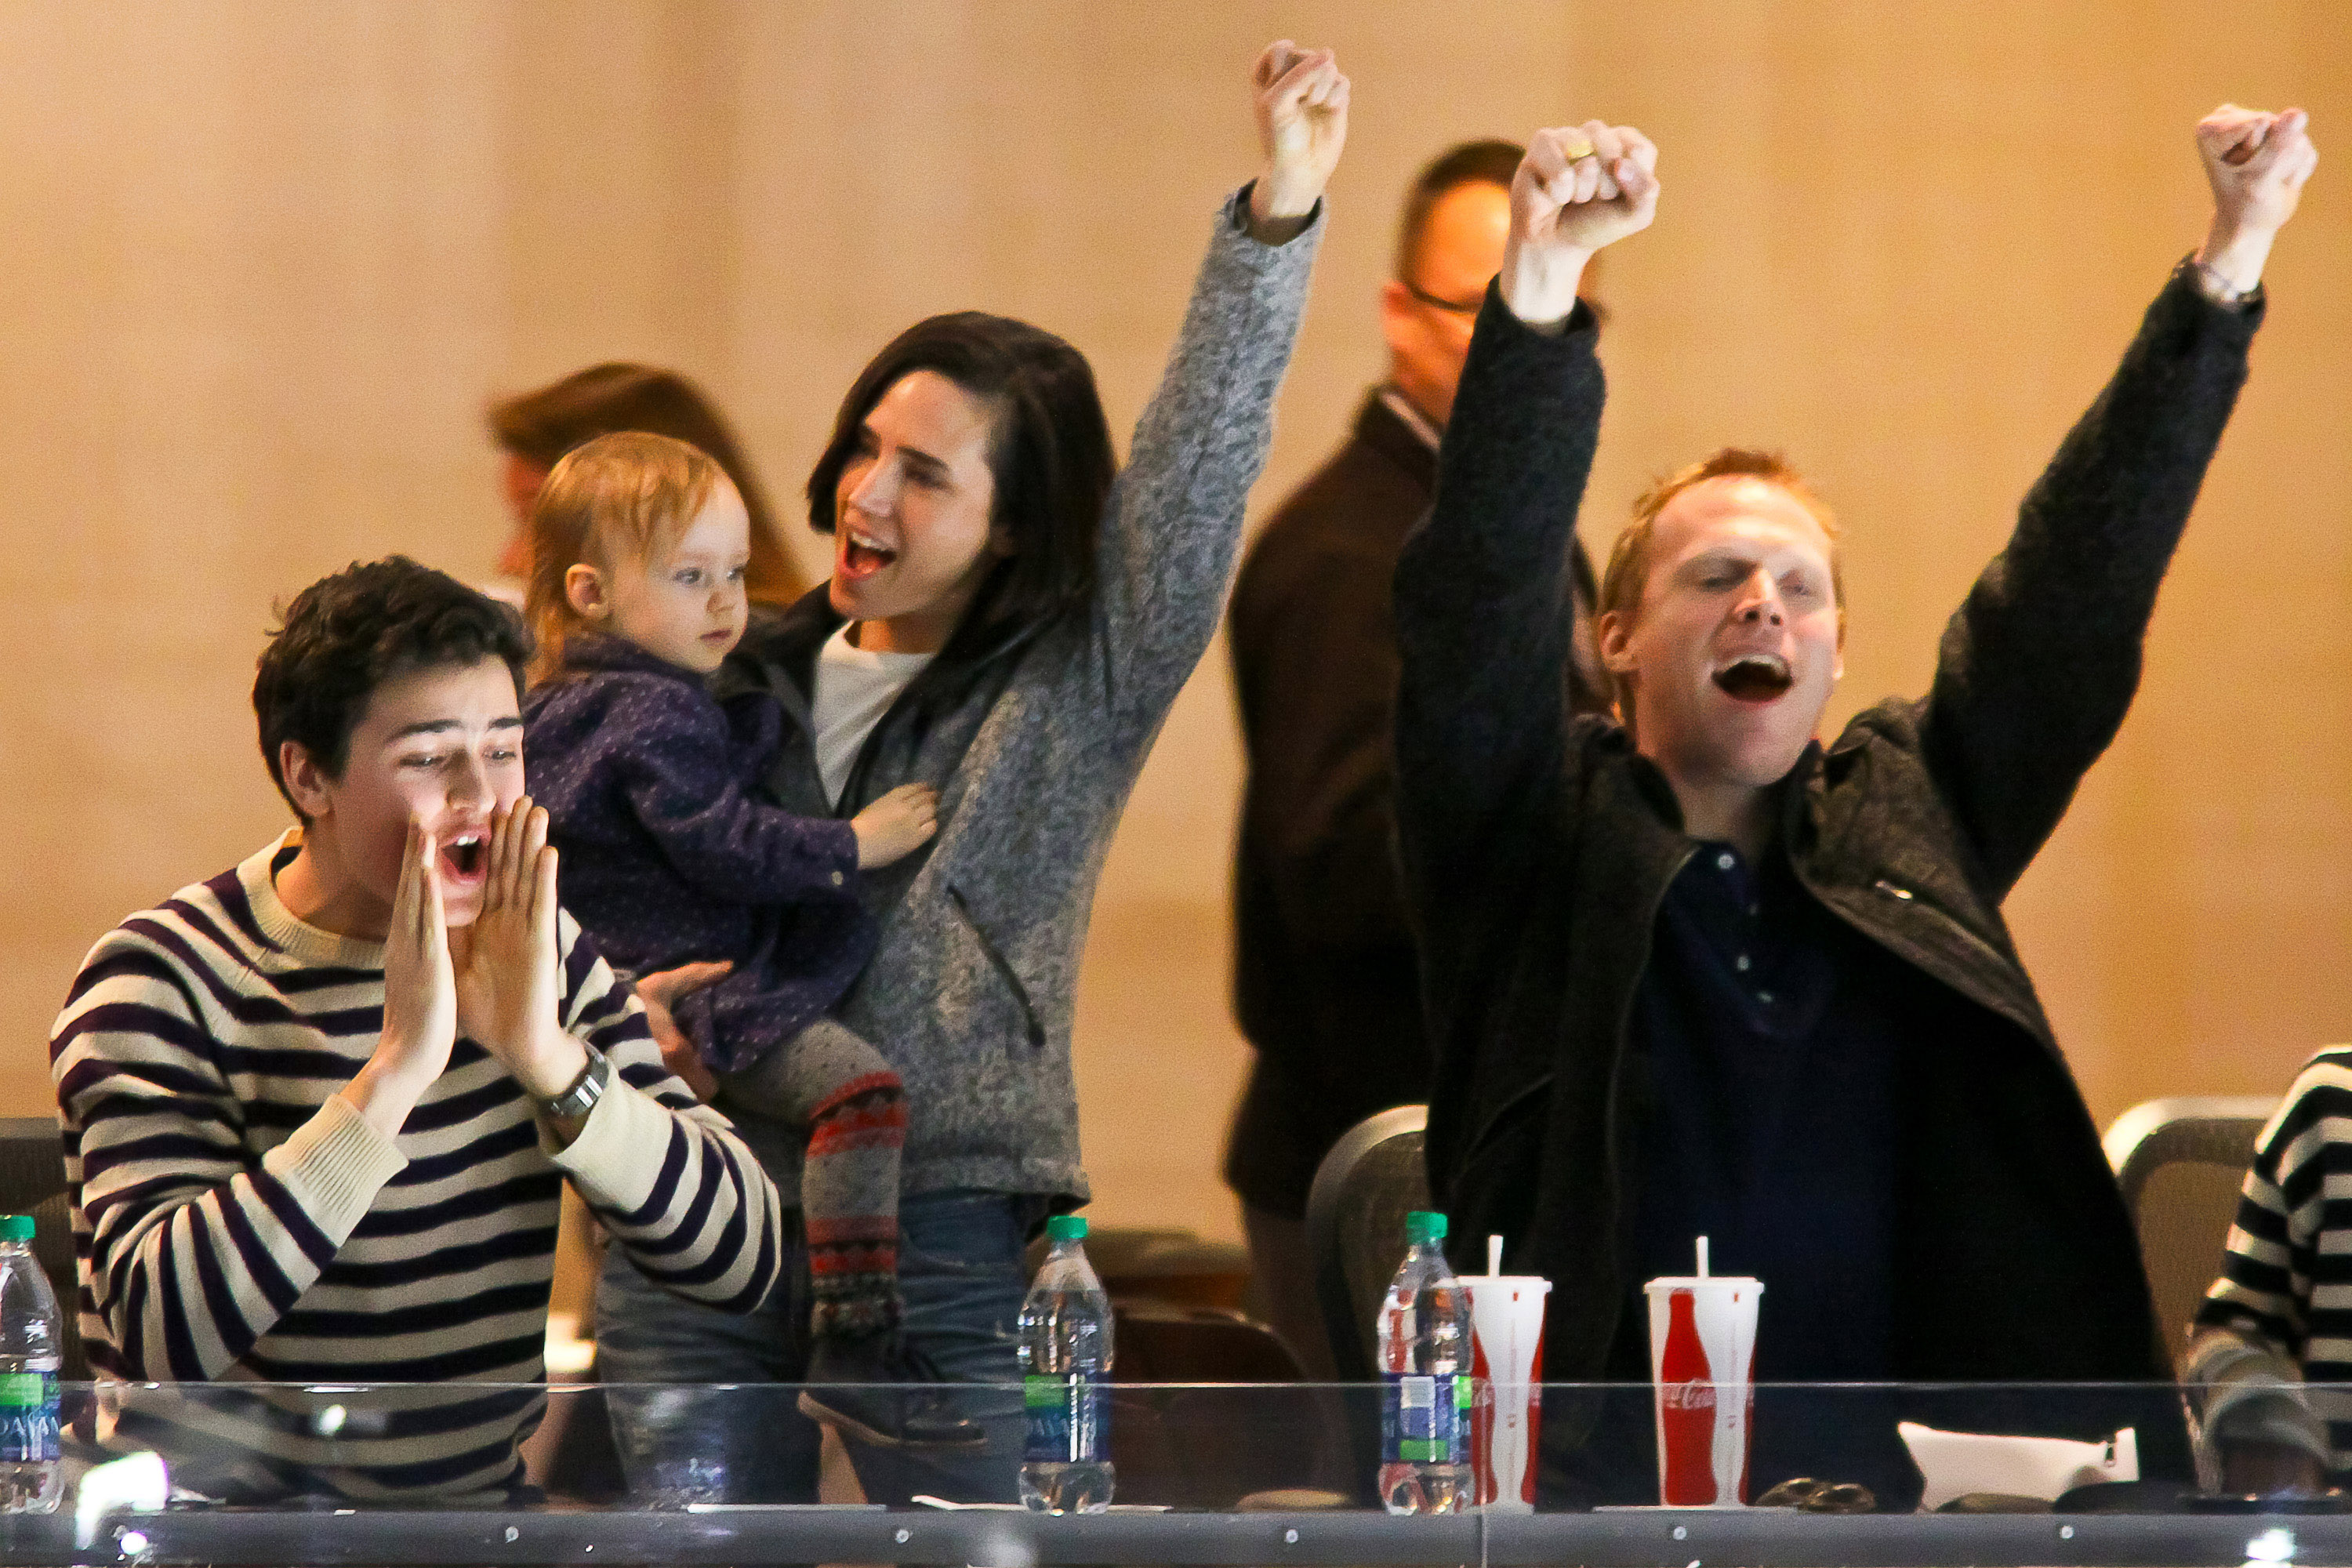 Jennifer Connelly, Paul Bettany, and their children pictured cheering at the MTS Centre on March 30, 2013 in Winnipeg, Manitoba, Canada | Source: Getty Images